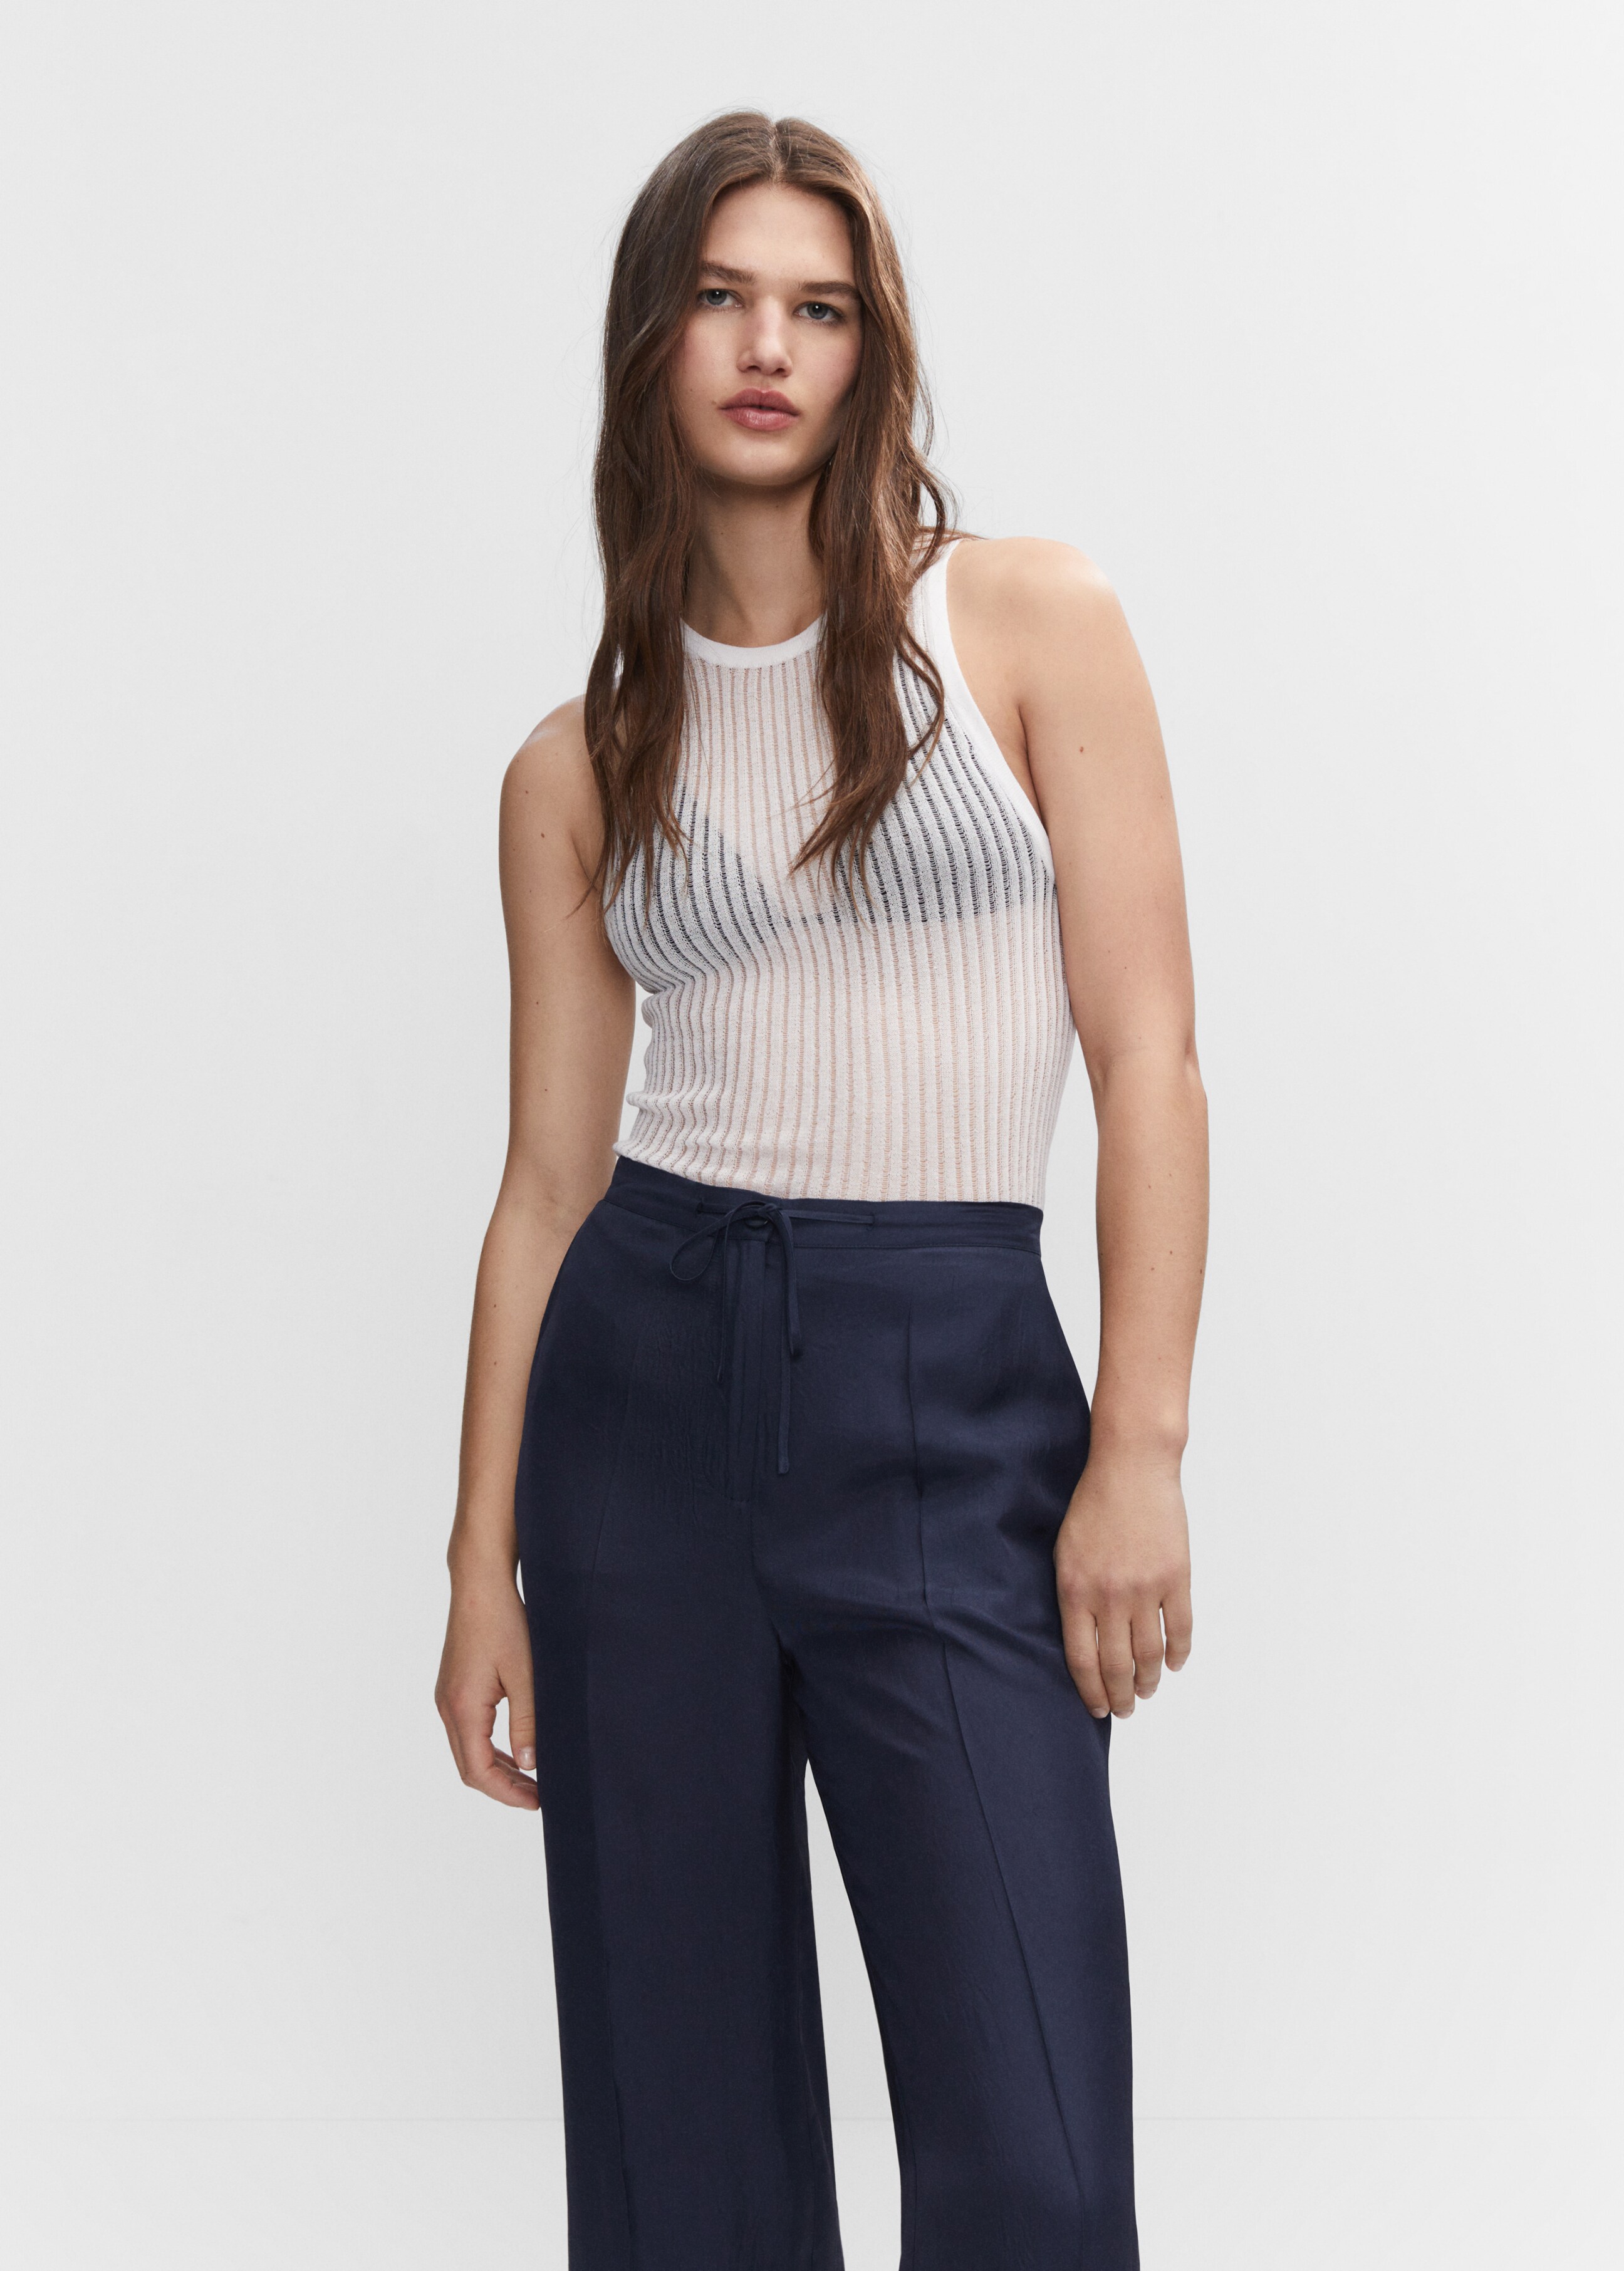 Bow culottes trousers - Details of the article 1